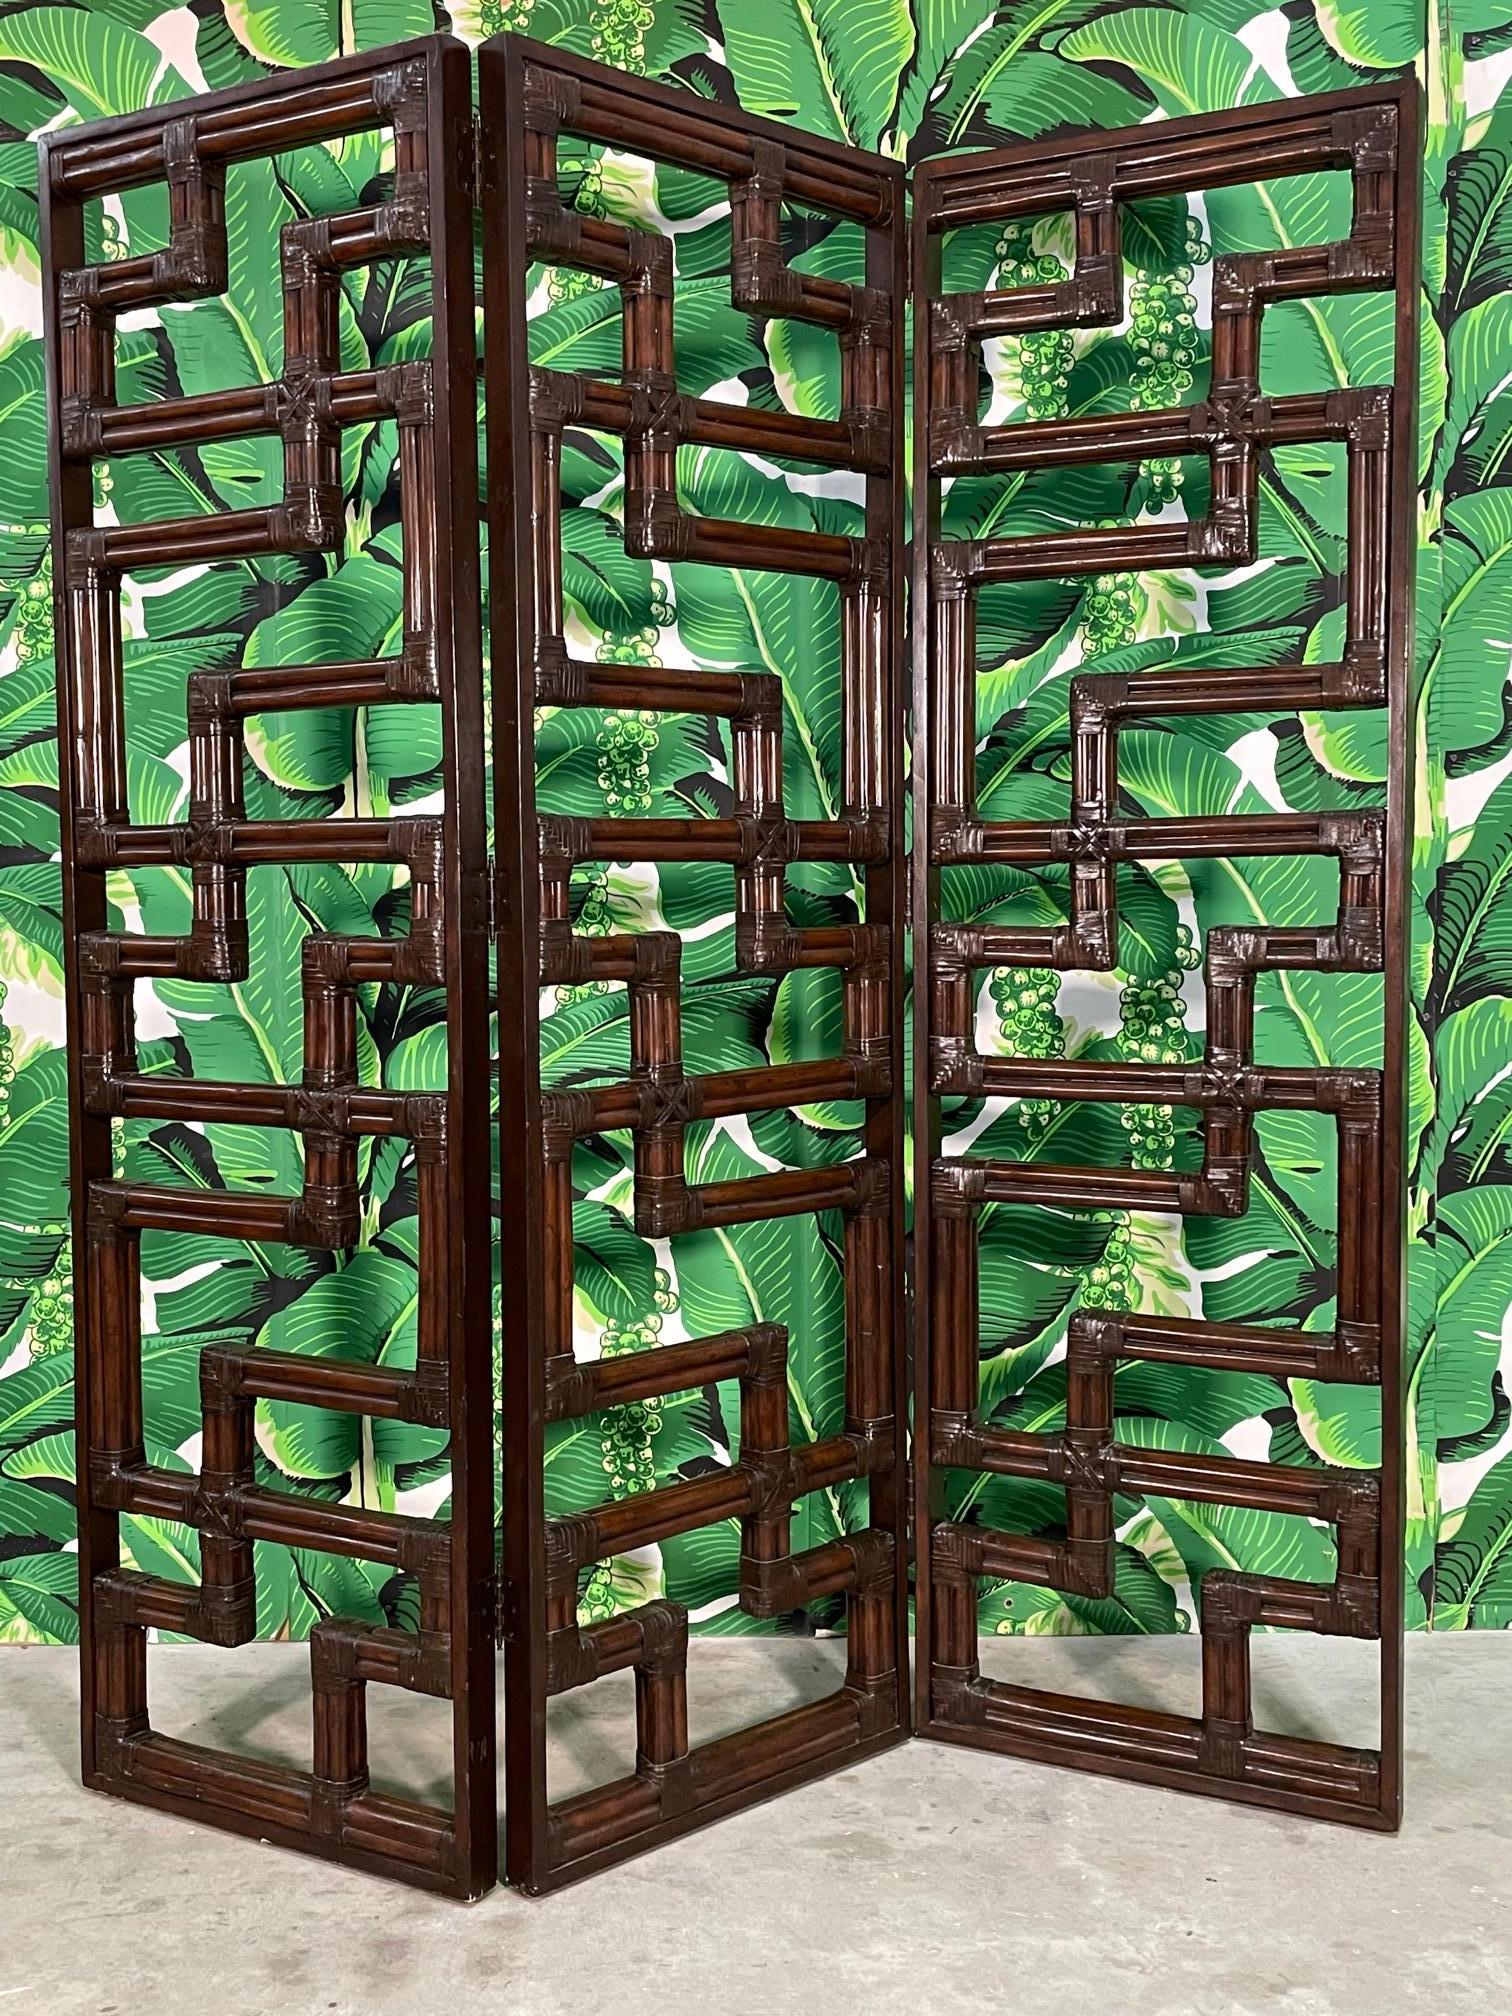 Rattan room divider screen features a heavy rattan geometric fretwork design and solid wood frame. Three panels open to a total of 64.5